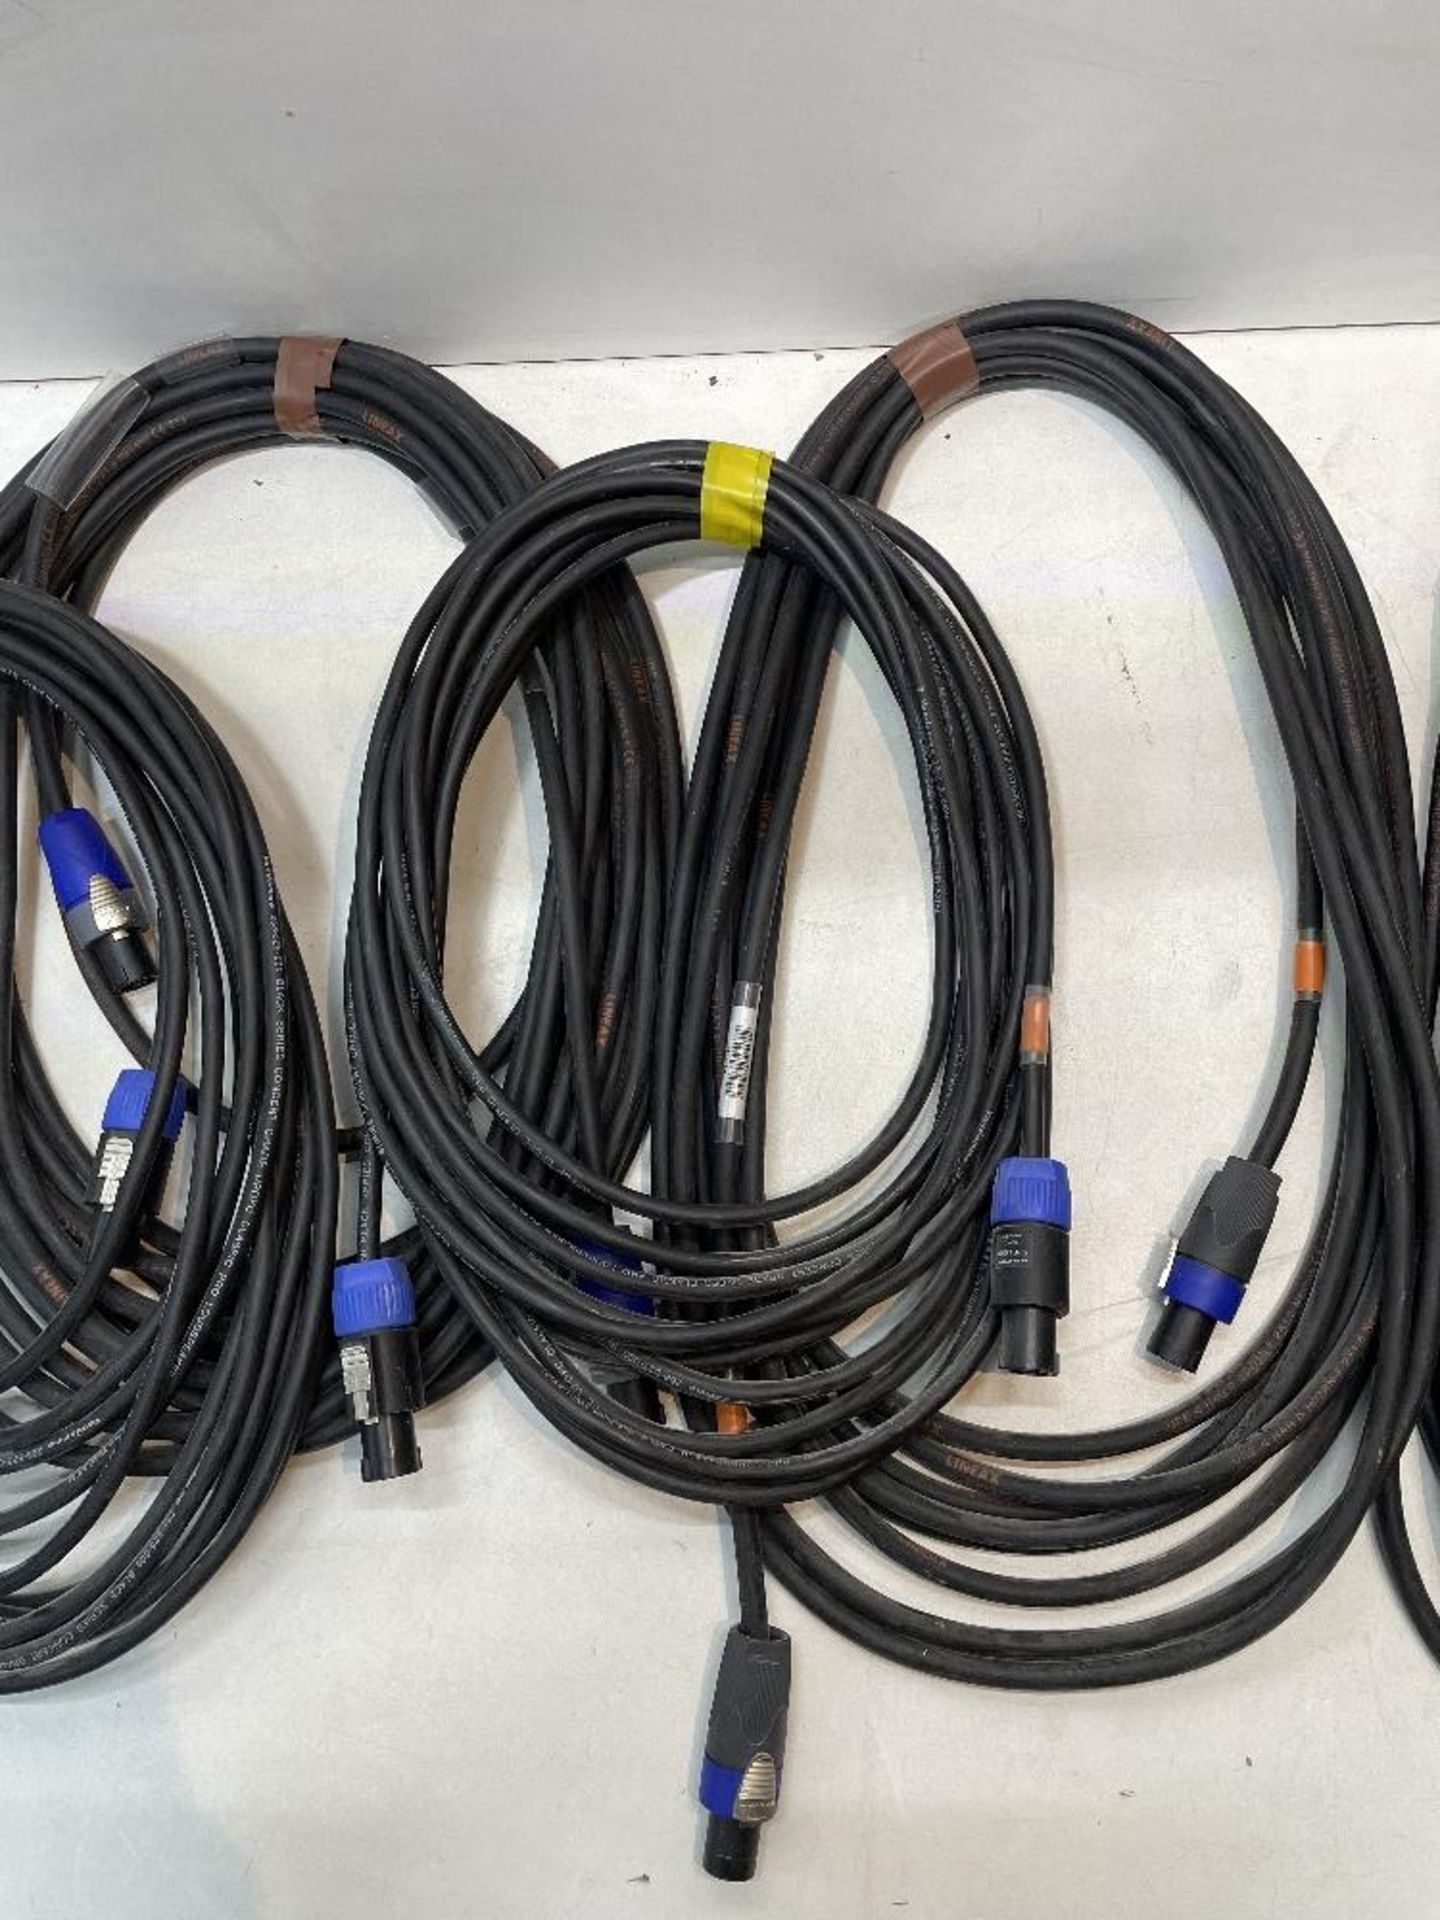 5 x Various Sized 2-Pole Speakon Cables - Image 3 of 5